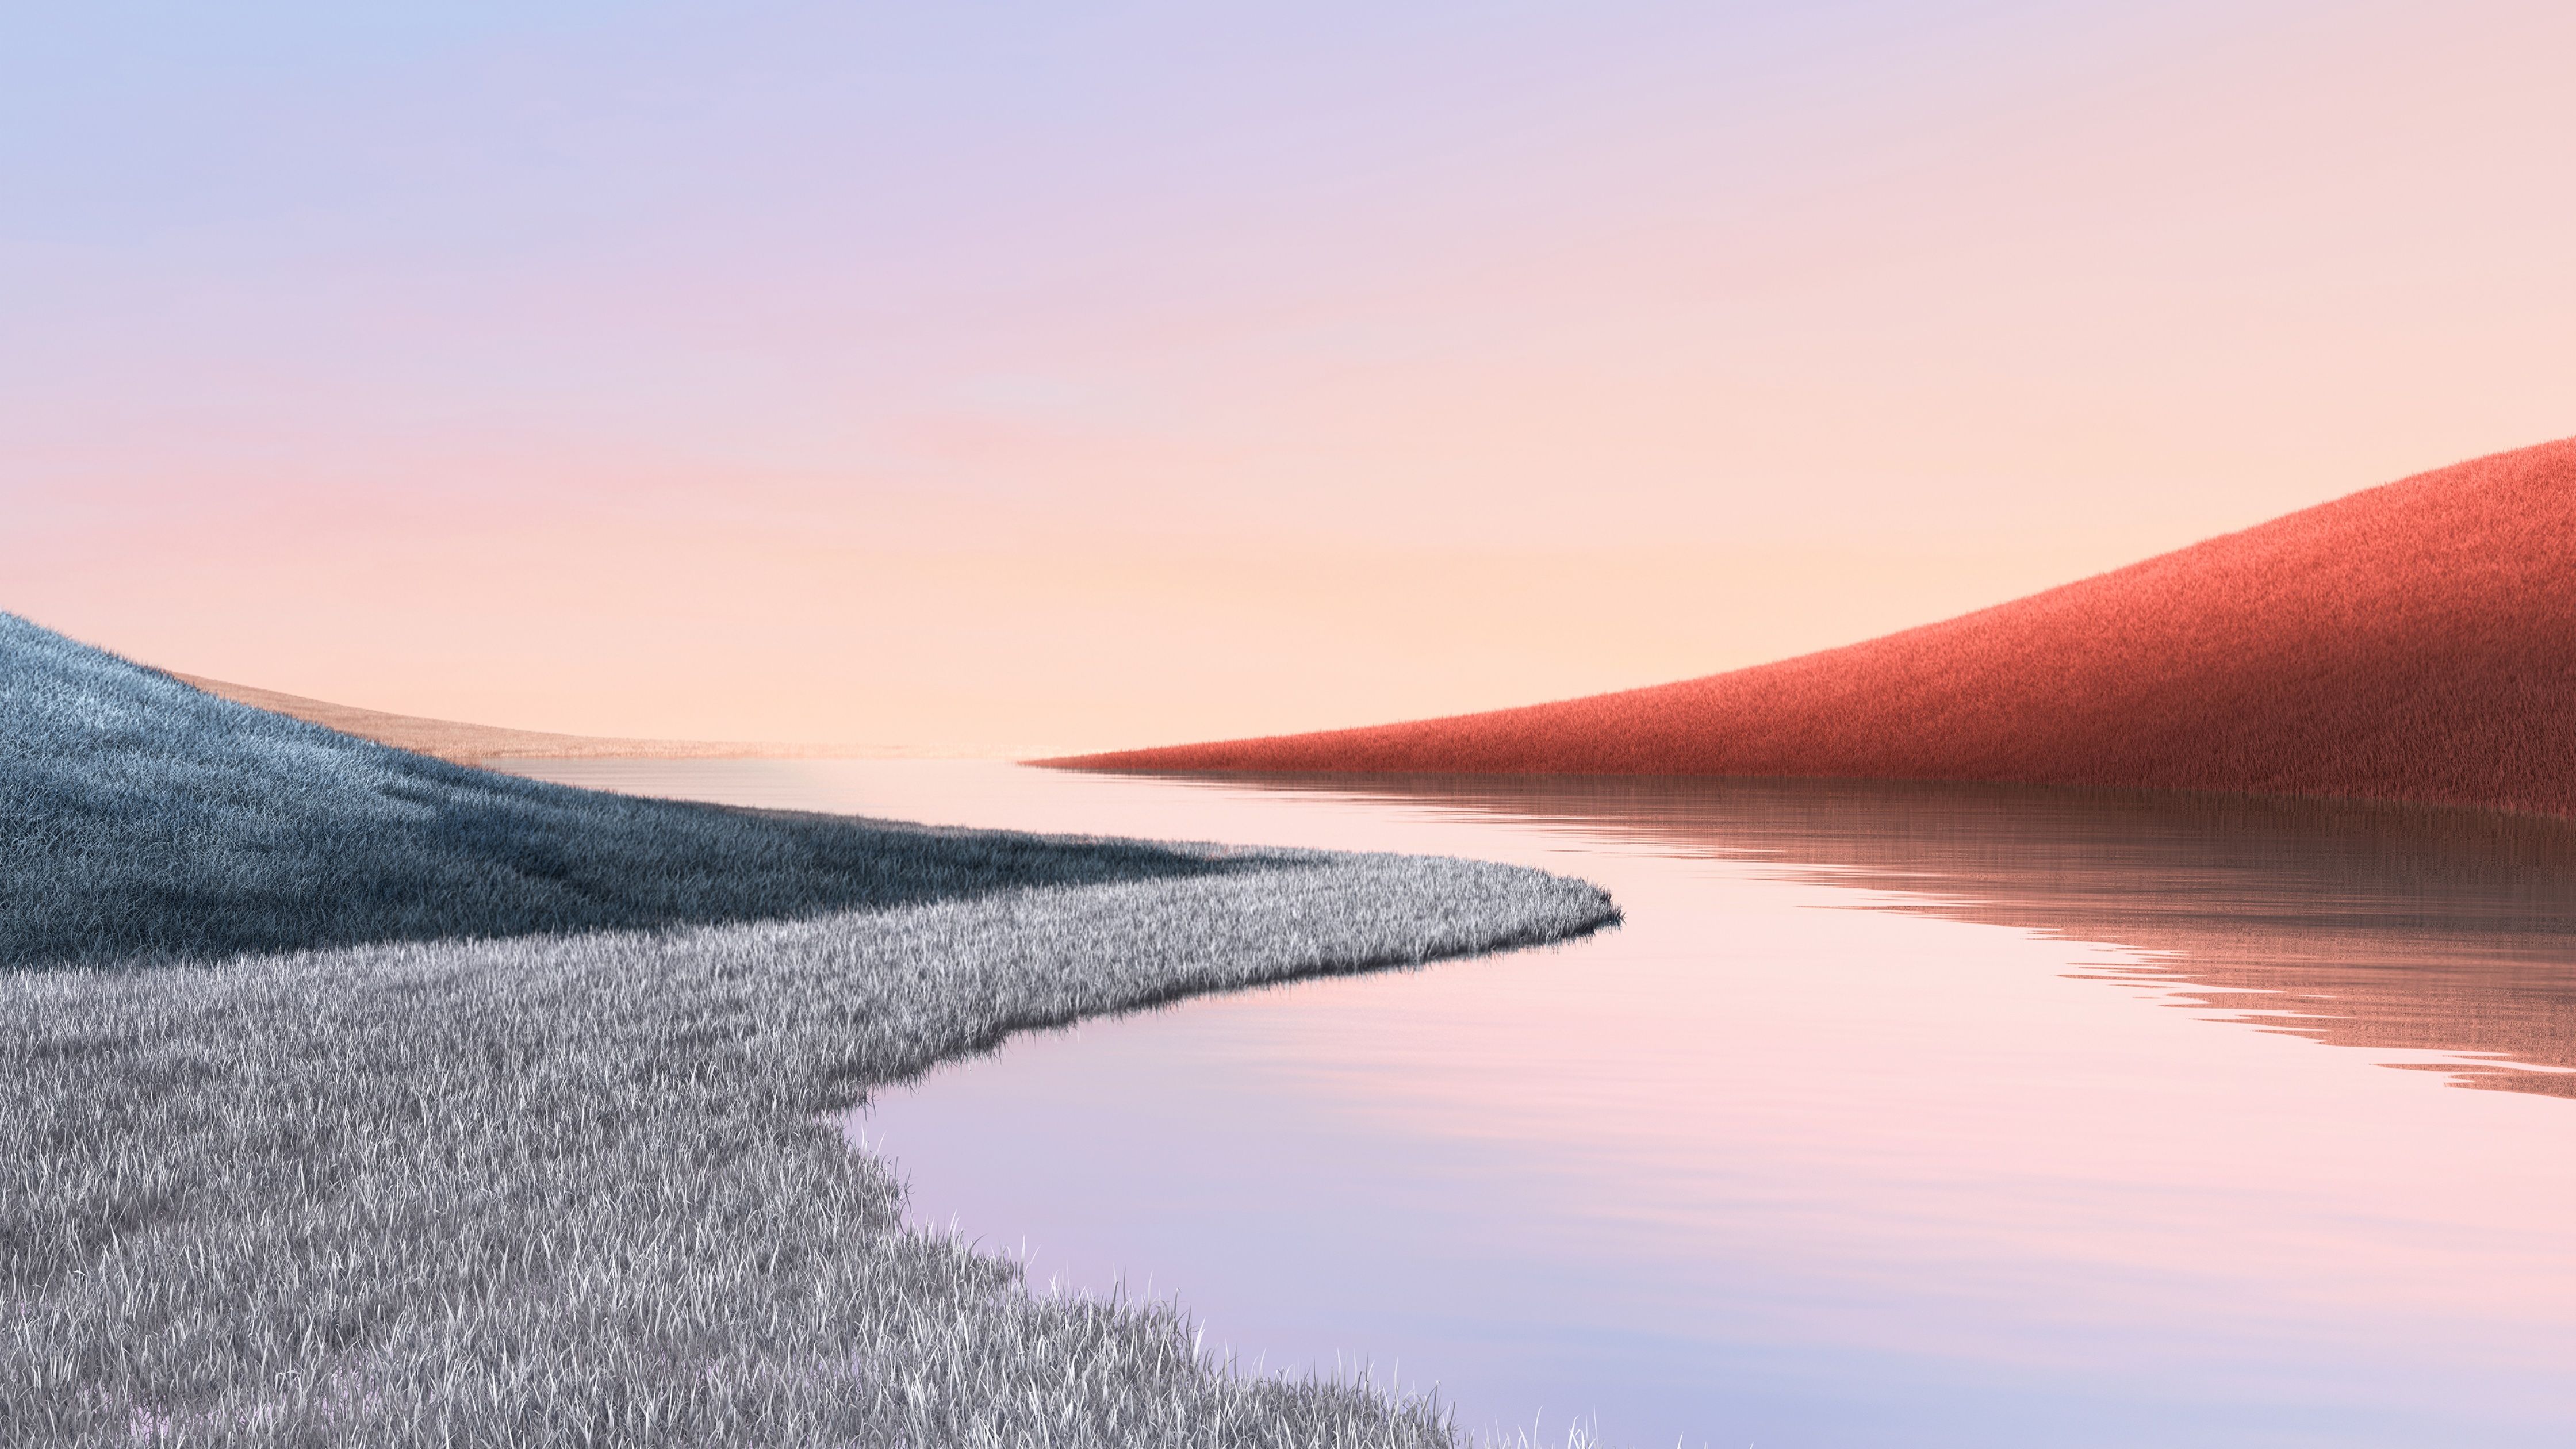 A digital painting of a lake with grass in the foreground and hills in the background. - Lake